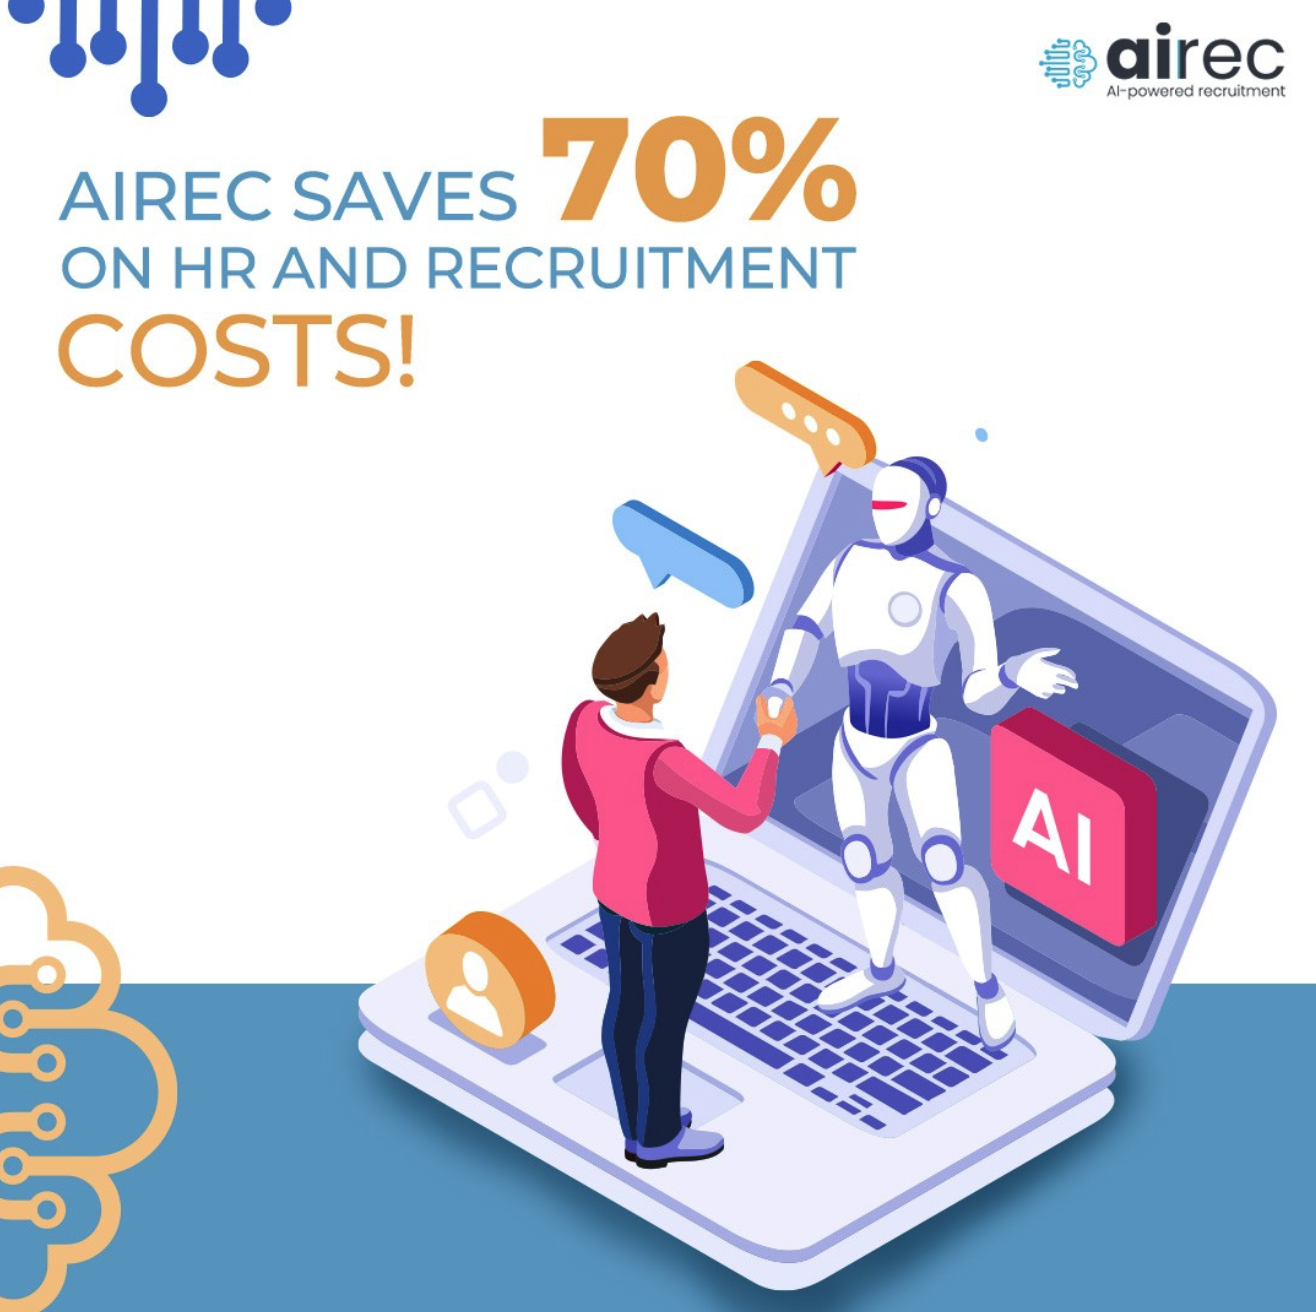 AIREC shortlists the CV as per your past hiring pattern, schedules and conducts a video interview with the candidate.